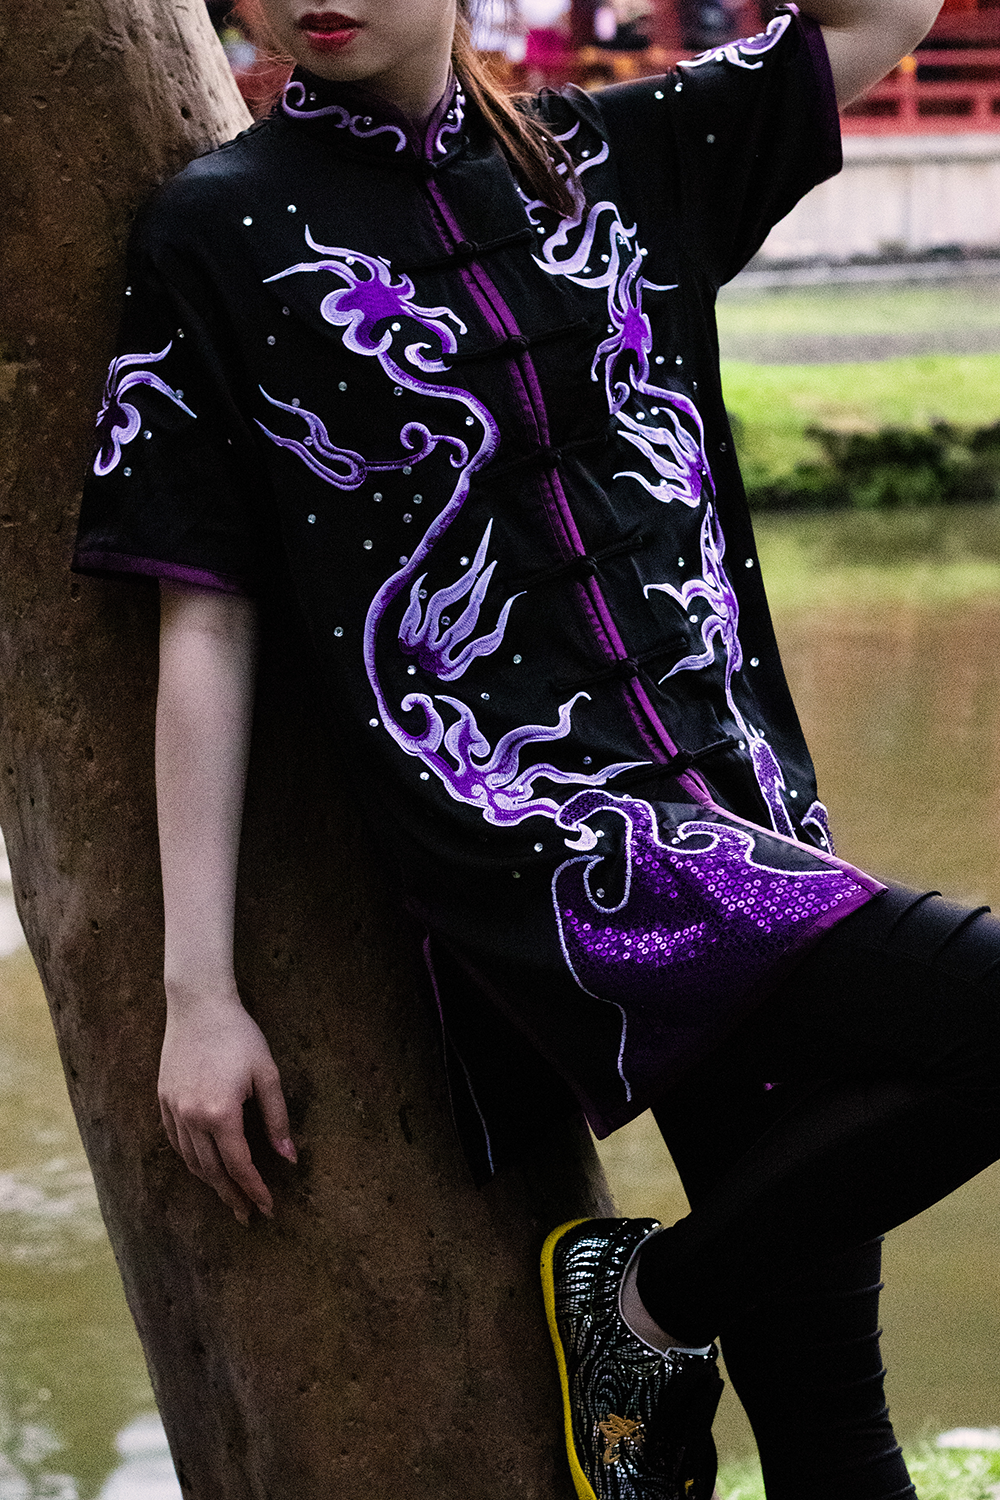 #07 Stunning Black with Intricate Purple Flames  & Clouds Silk